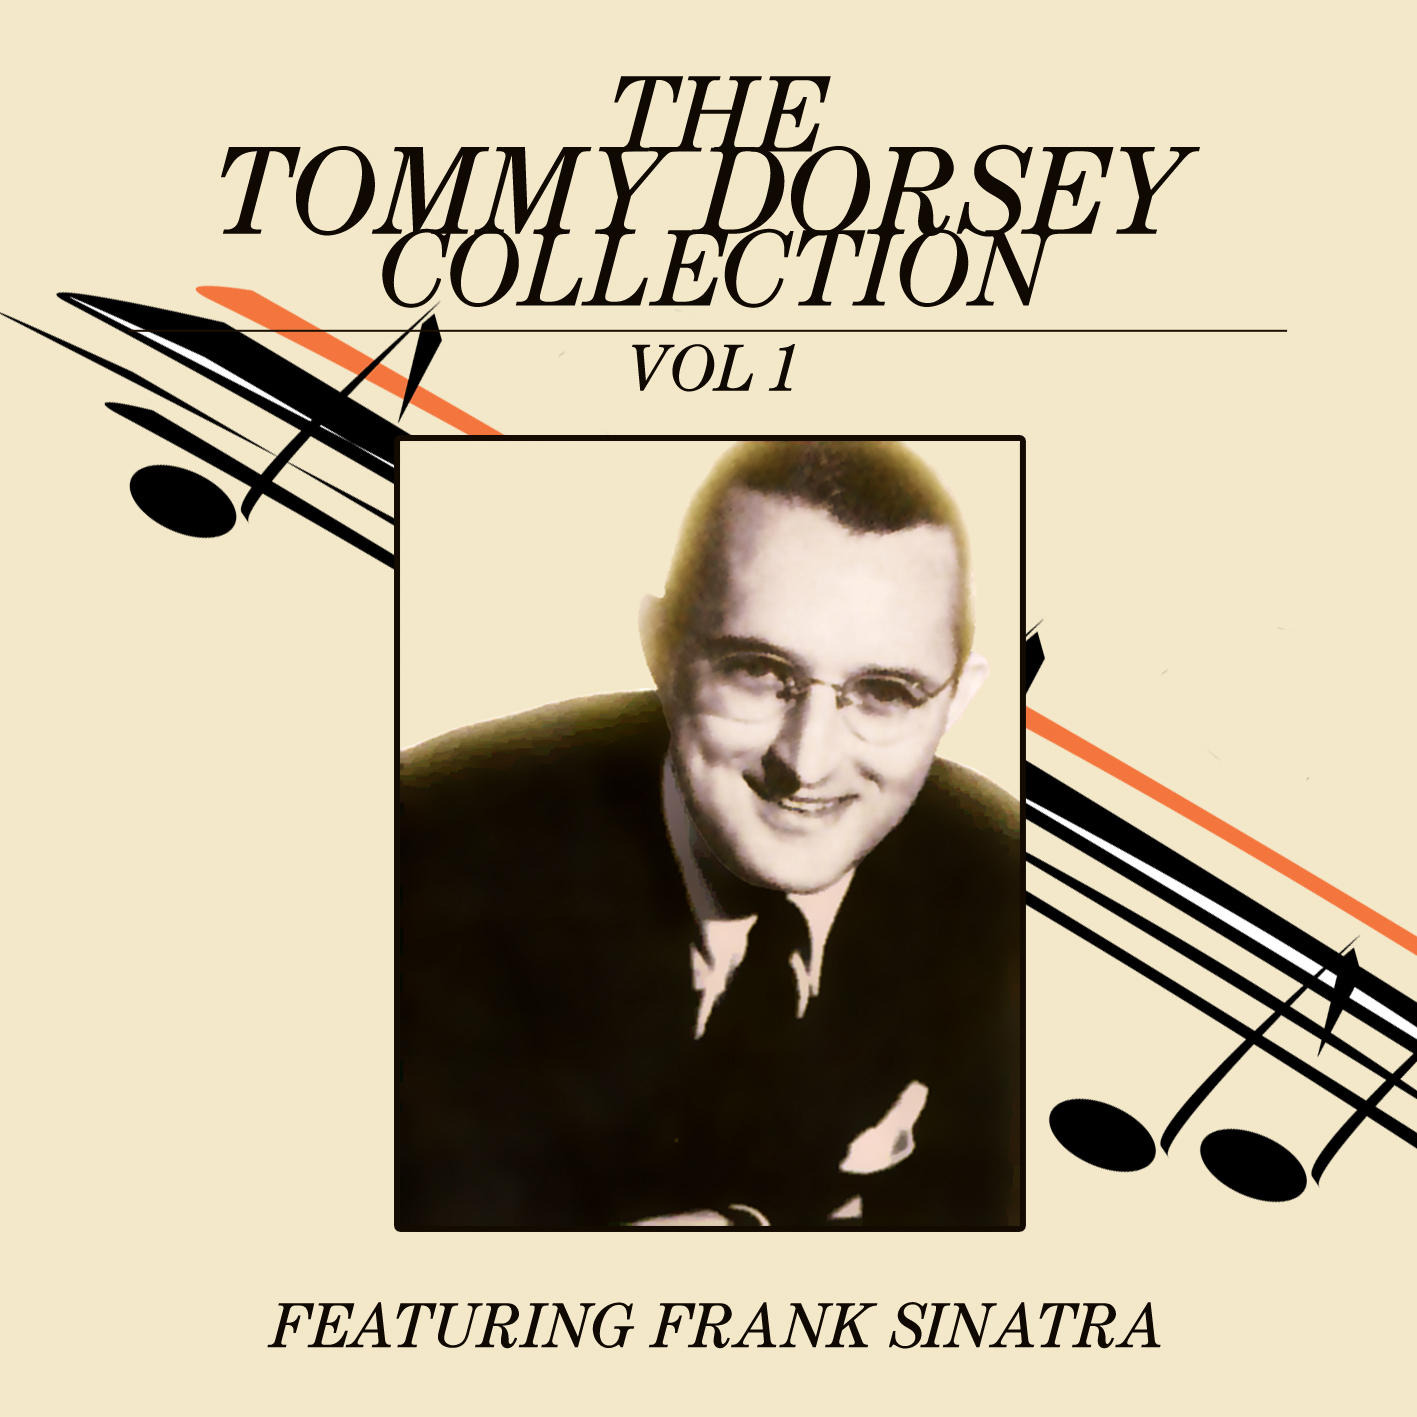 The Tommy Dorsey Collection feat. Frank Sinatra, Vol. 1